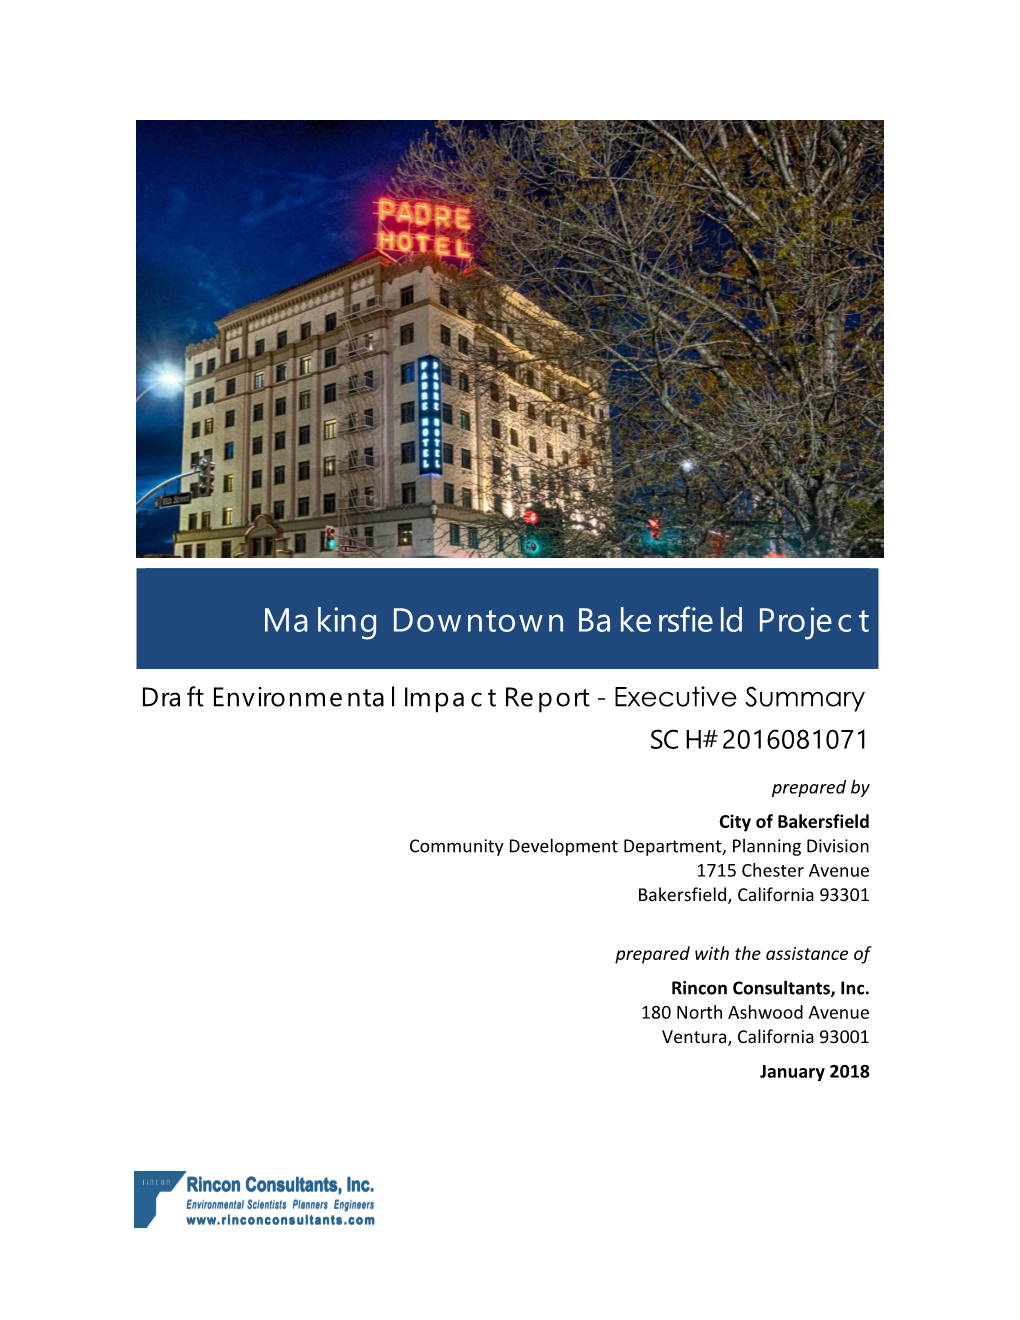 Making Downtown Bakersfield Project